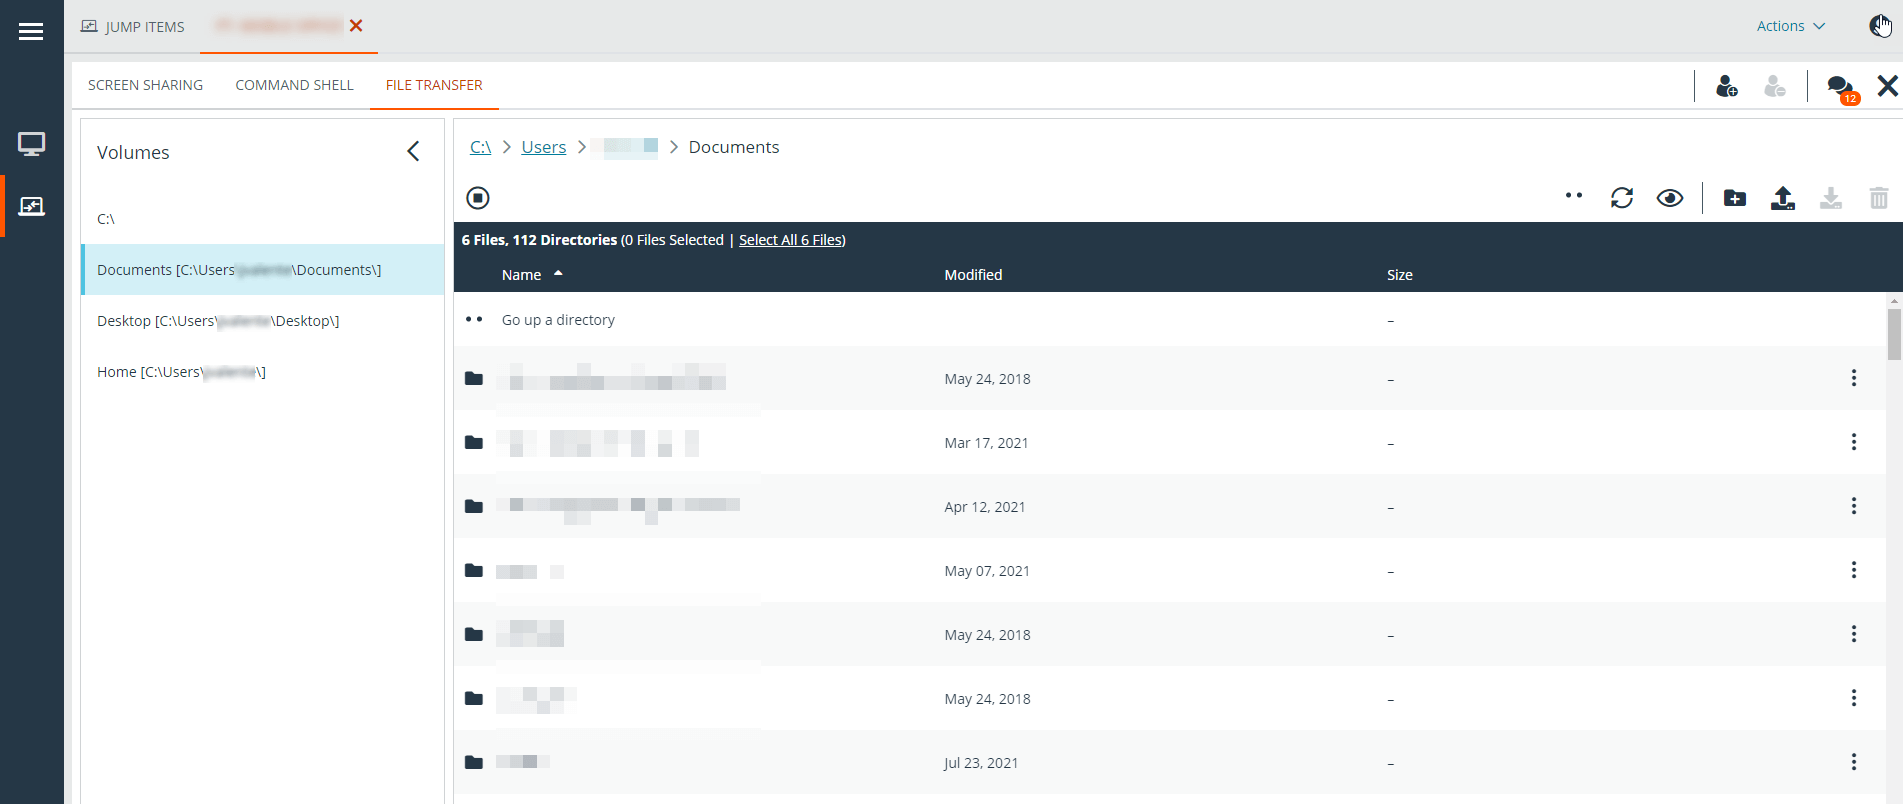 https://www.anyviewer.com/screenshot/others/beyondtrust/file-transfer-web.png